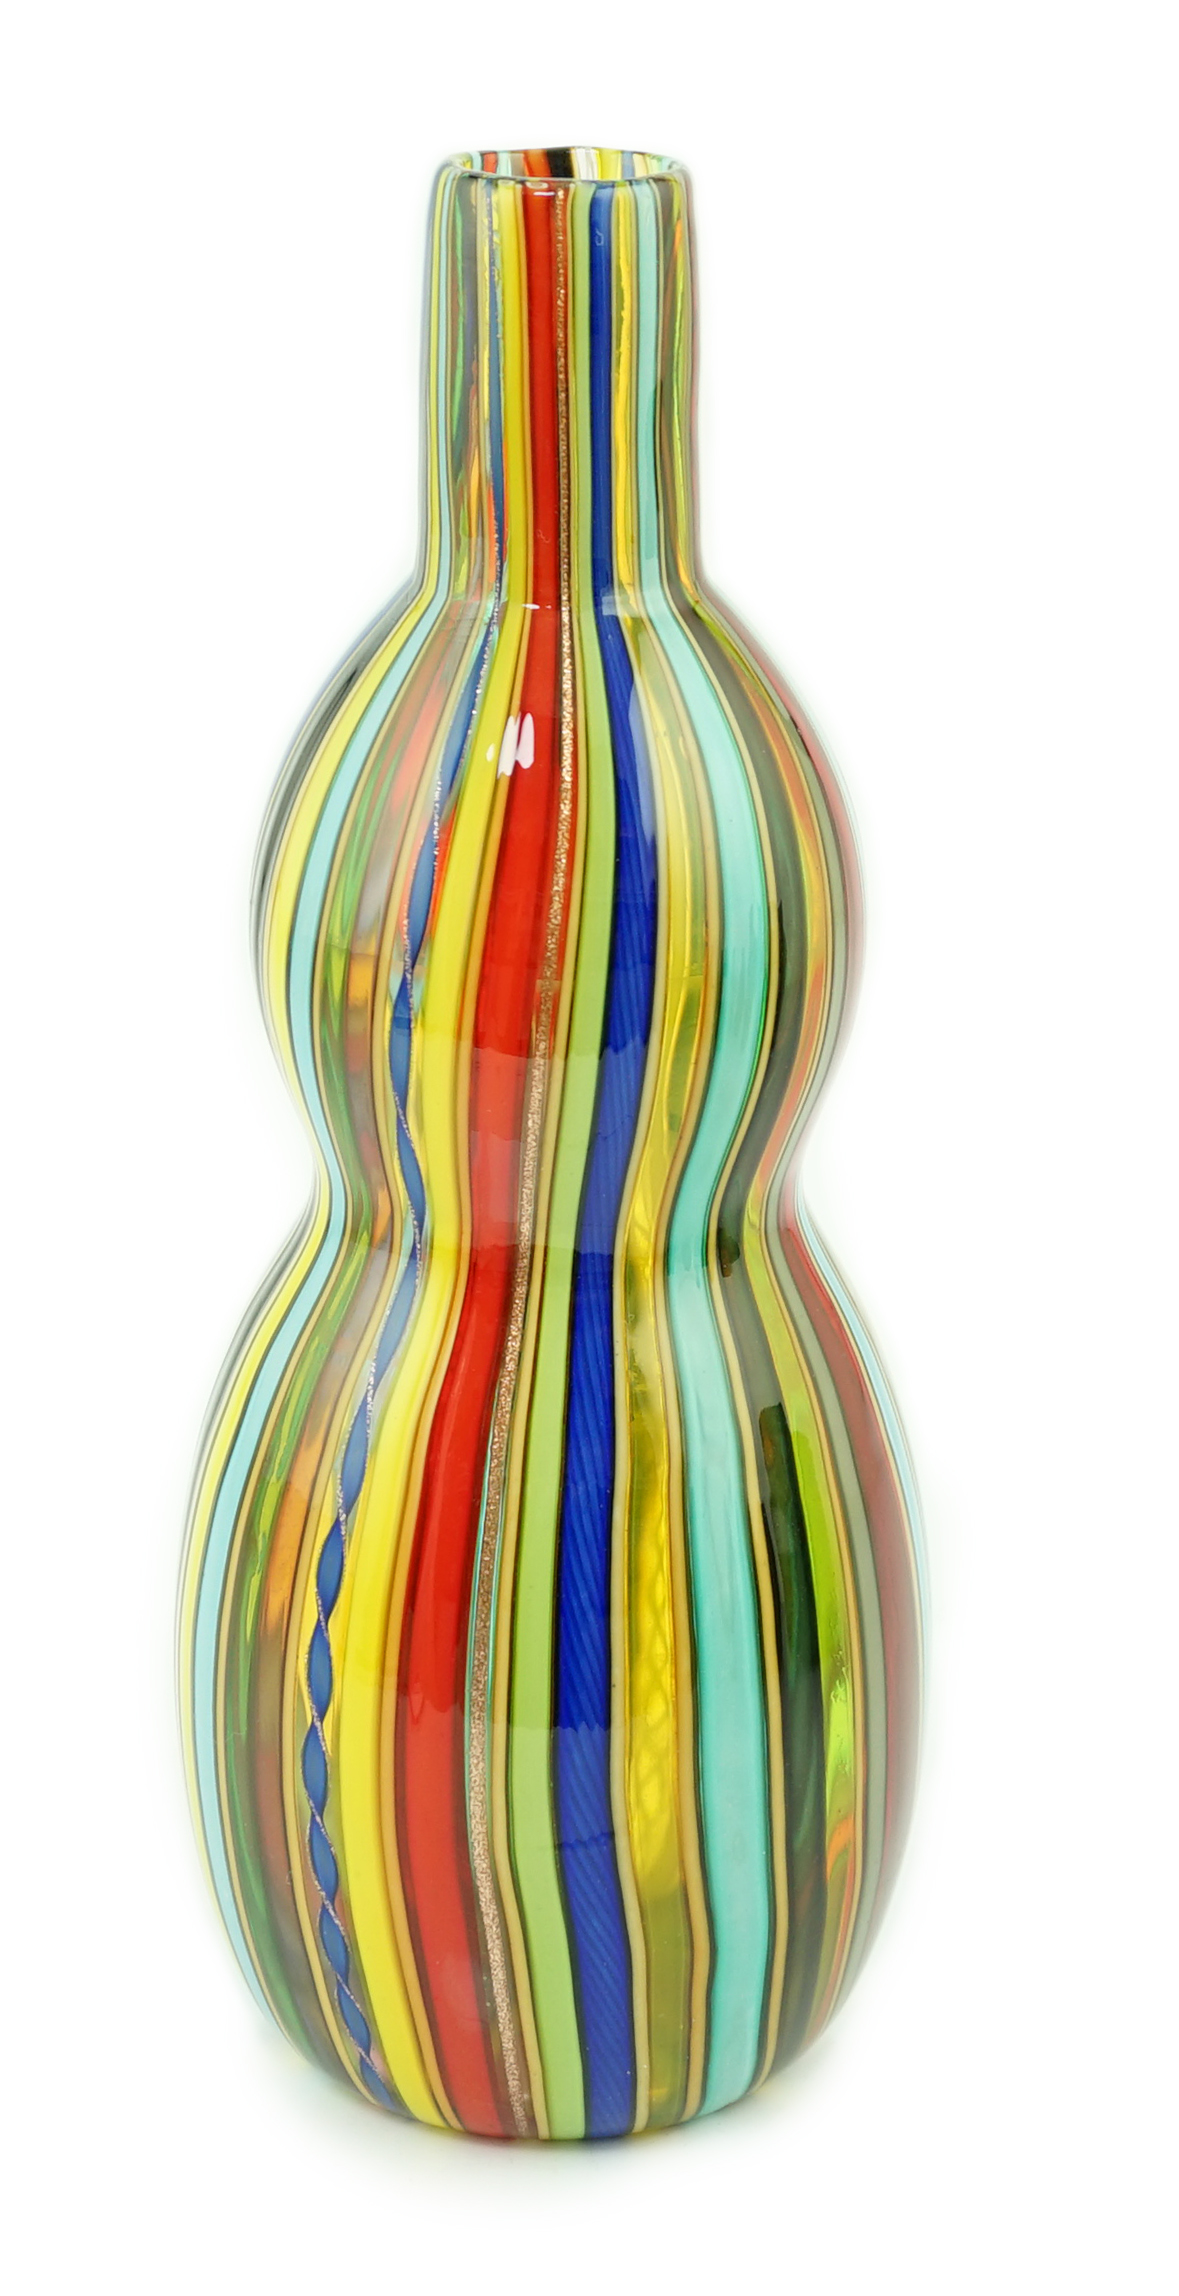 Vittorio Ferro (1932-2012) A Murano glass Murrine vase, double gourd shaped, with vertical polychrome canes, signed, 27cms, Please note this lot attracts an additional import tax of 20% on the hammer price